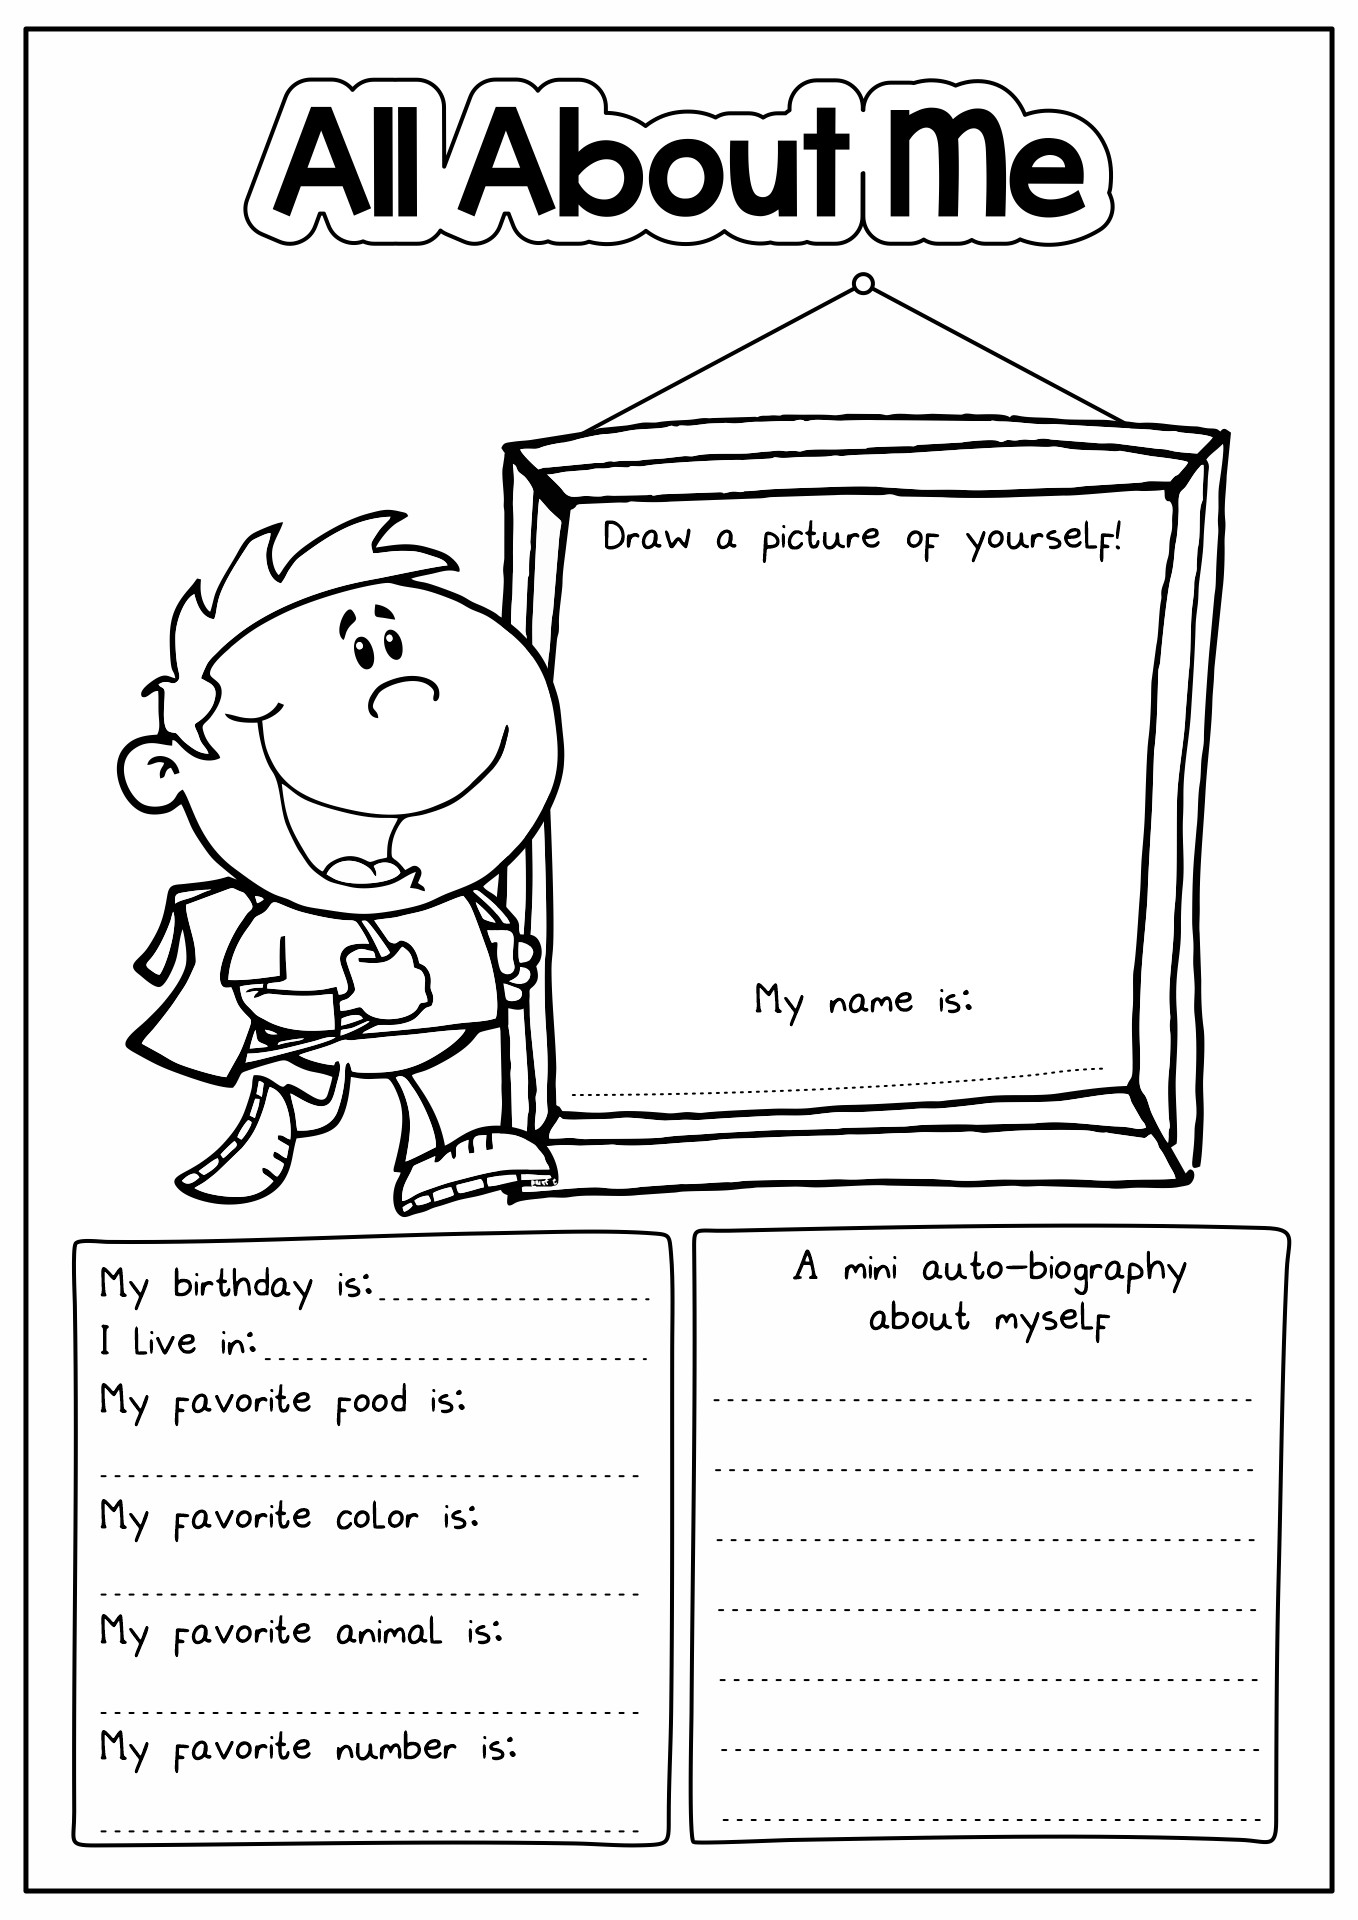 14 Best Images Of All About Me Printable Worksheet For Adults All 